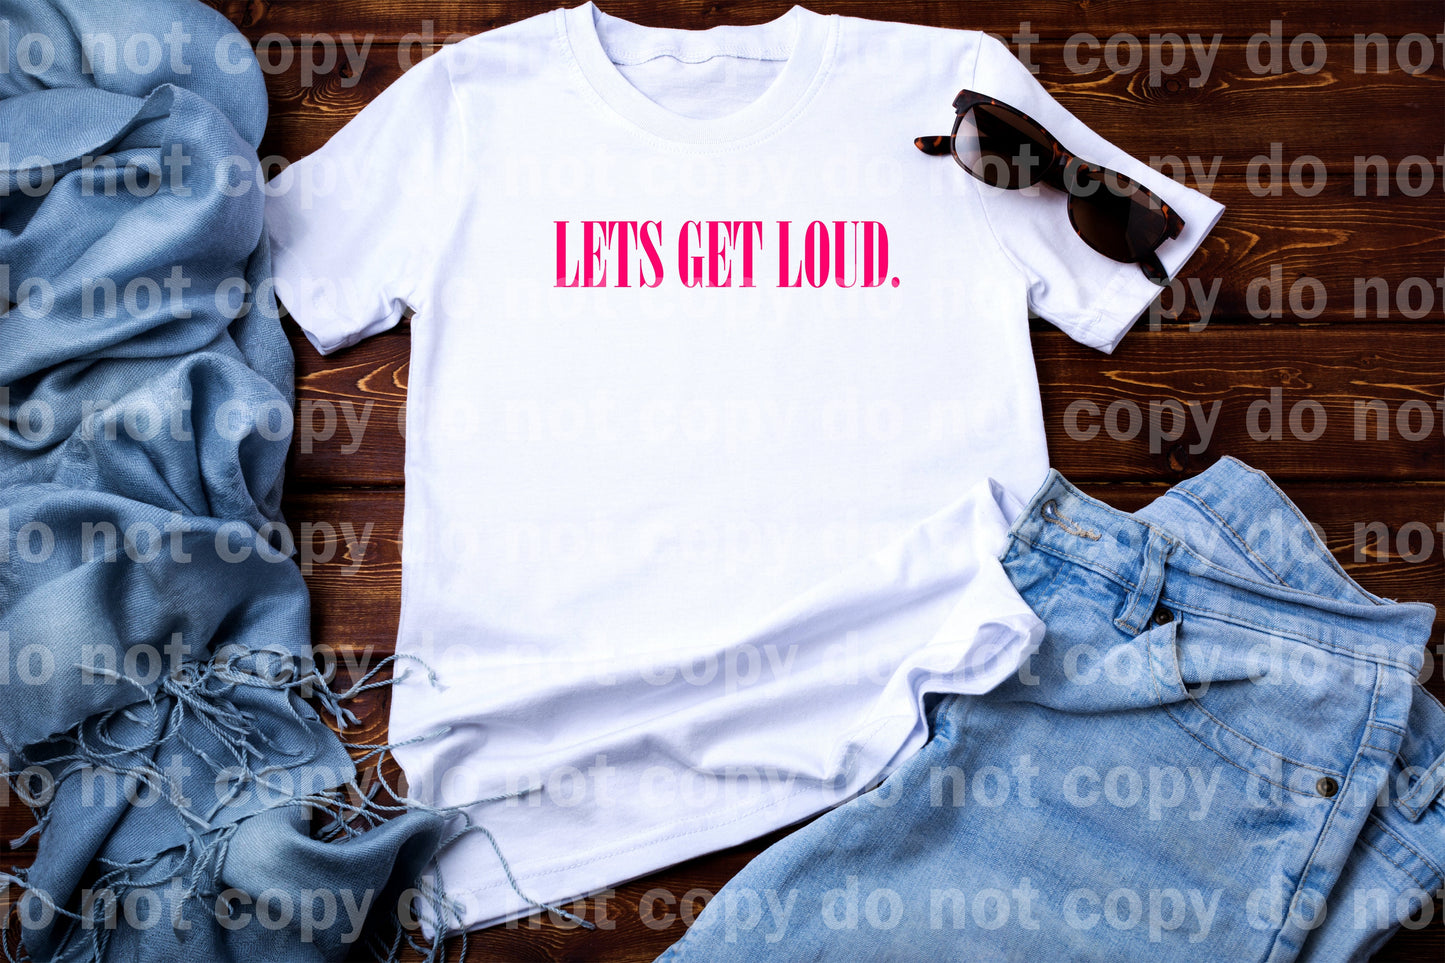 Let's Get Loud Typography Dream Print or Sublimation Print